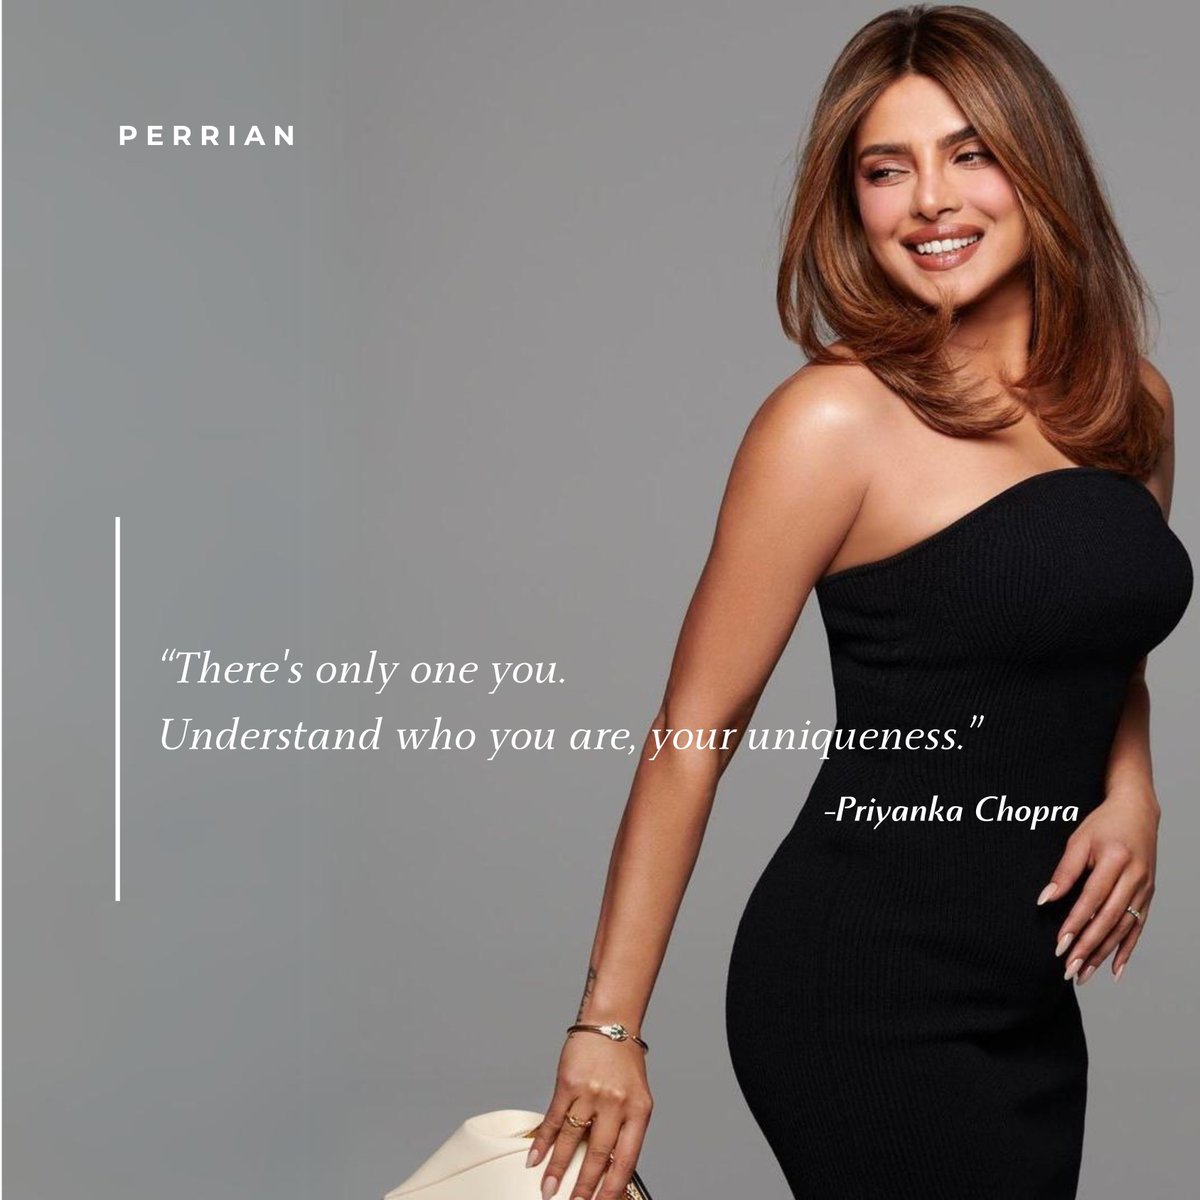 Priyanka Chopra defines what it means to be a confident, empowered woman. perrian.com #PriyankaChopra #confidence #her